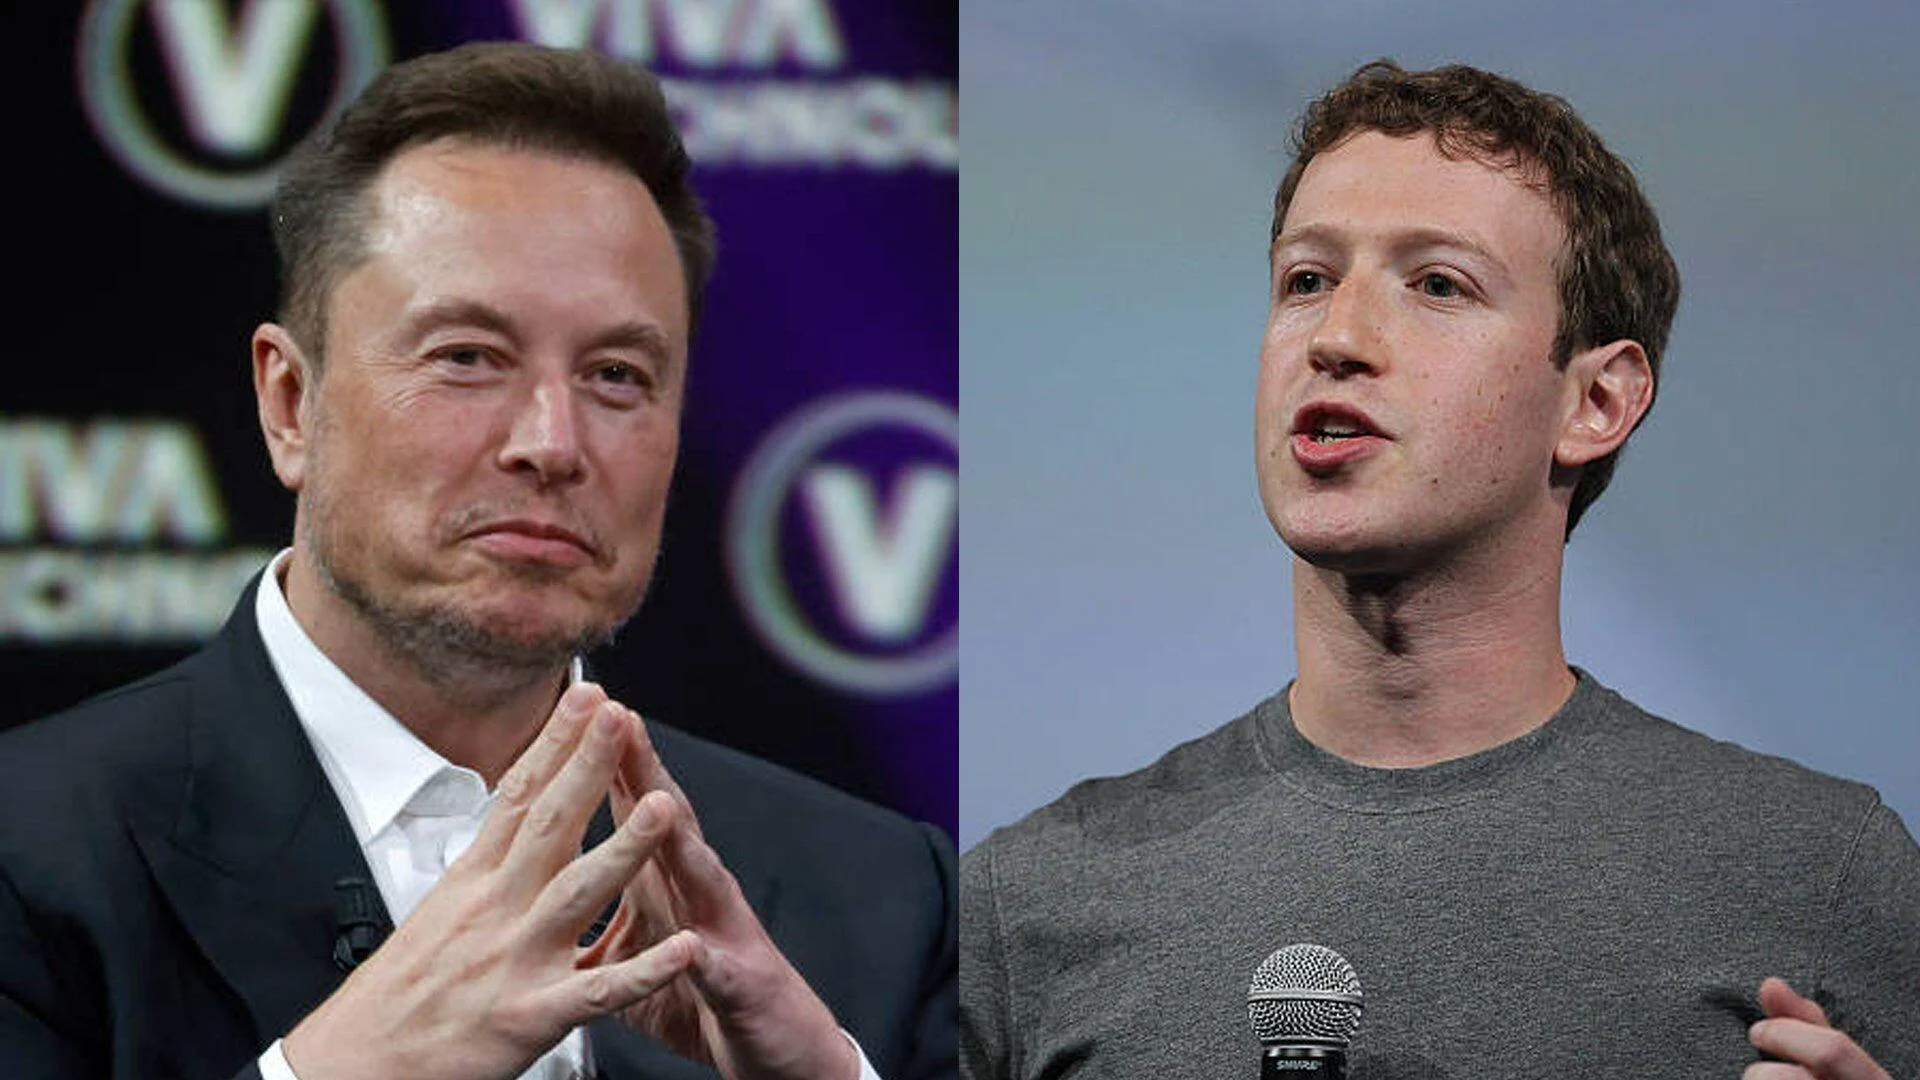 Musk: UFC Will Not Participate In Organizing Our Fight With Zuckerberg